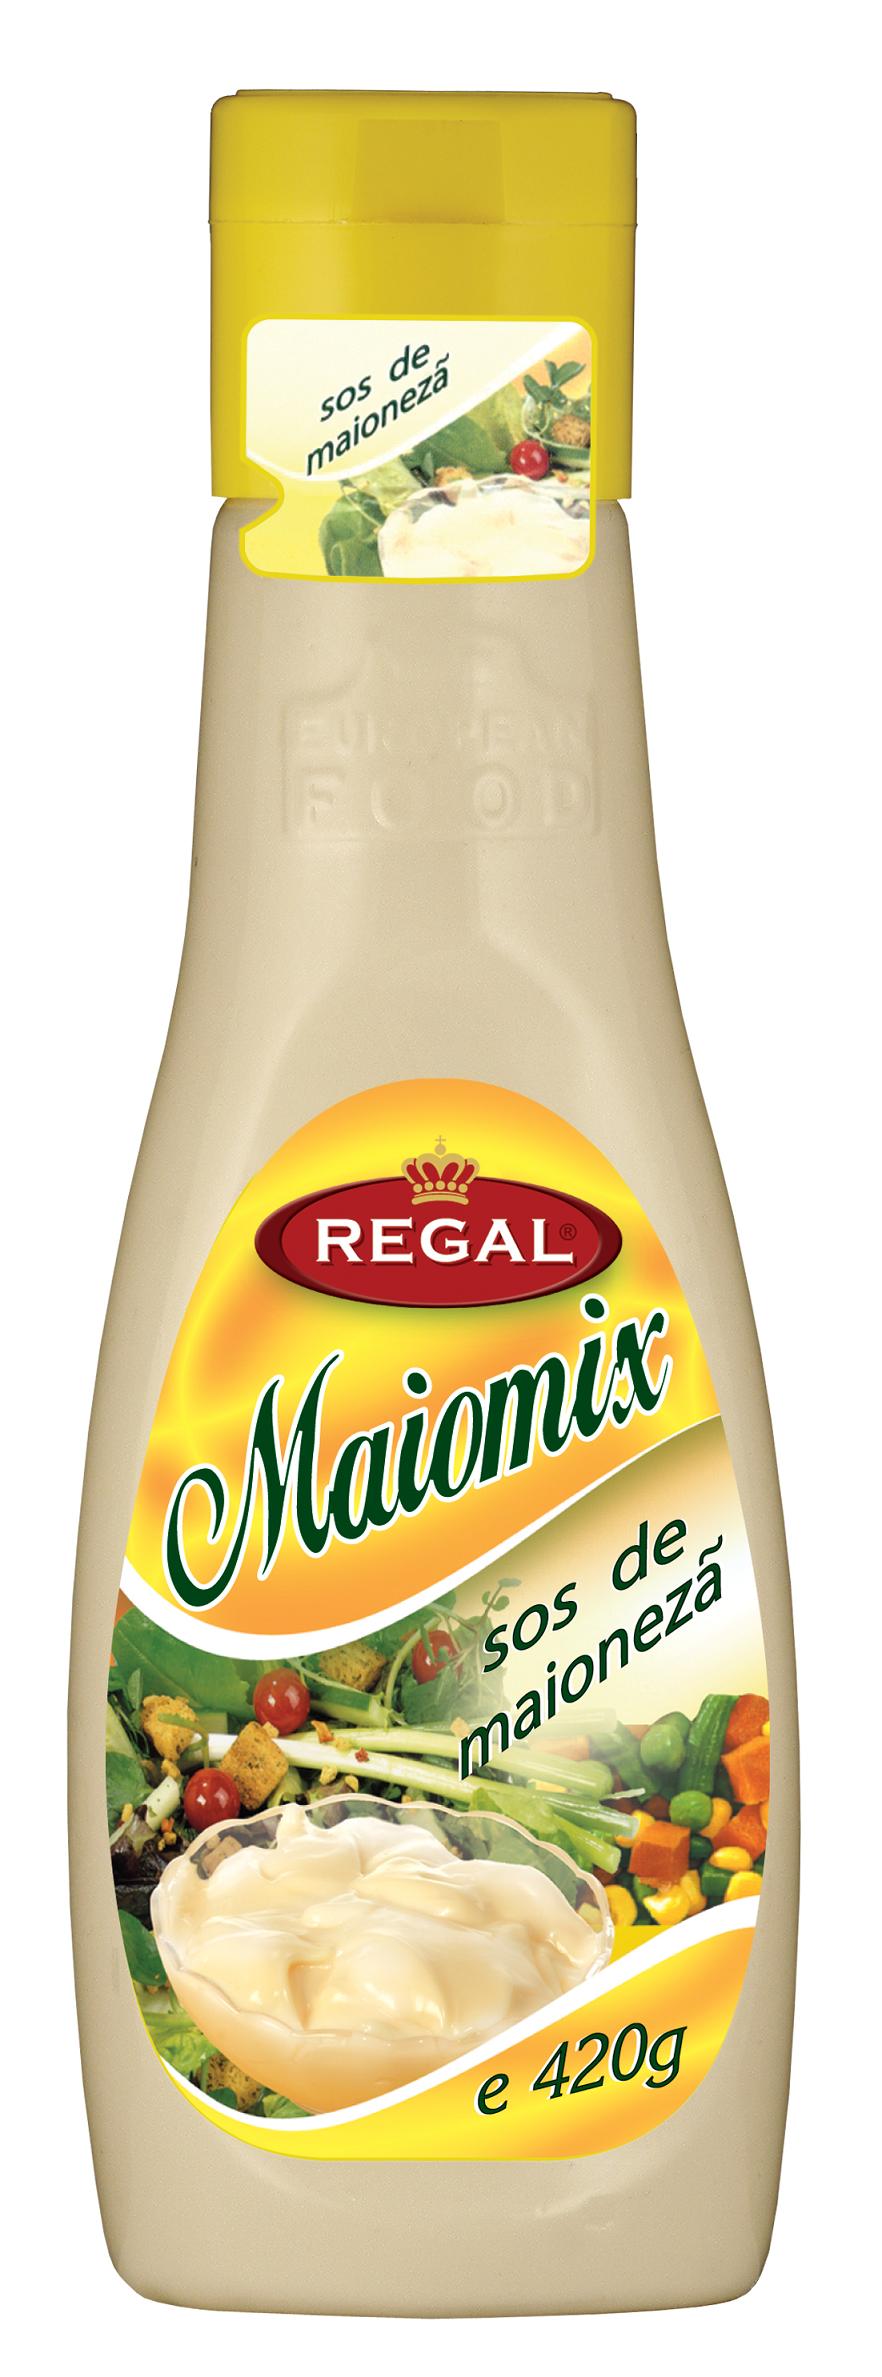 Price List Of Different Mayonnaise In South Africa 40